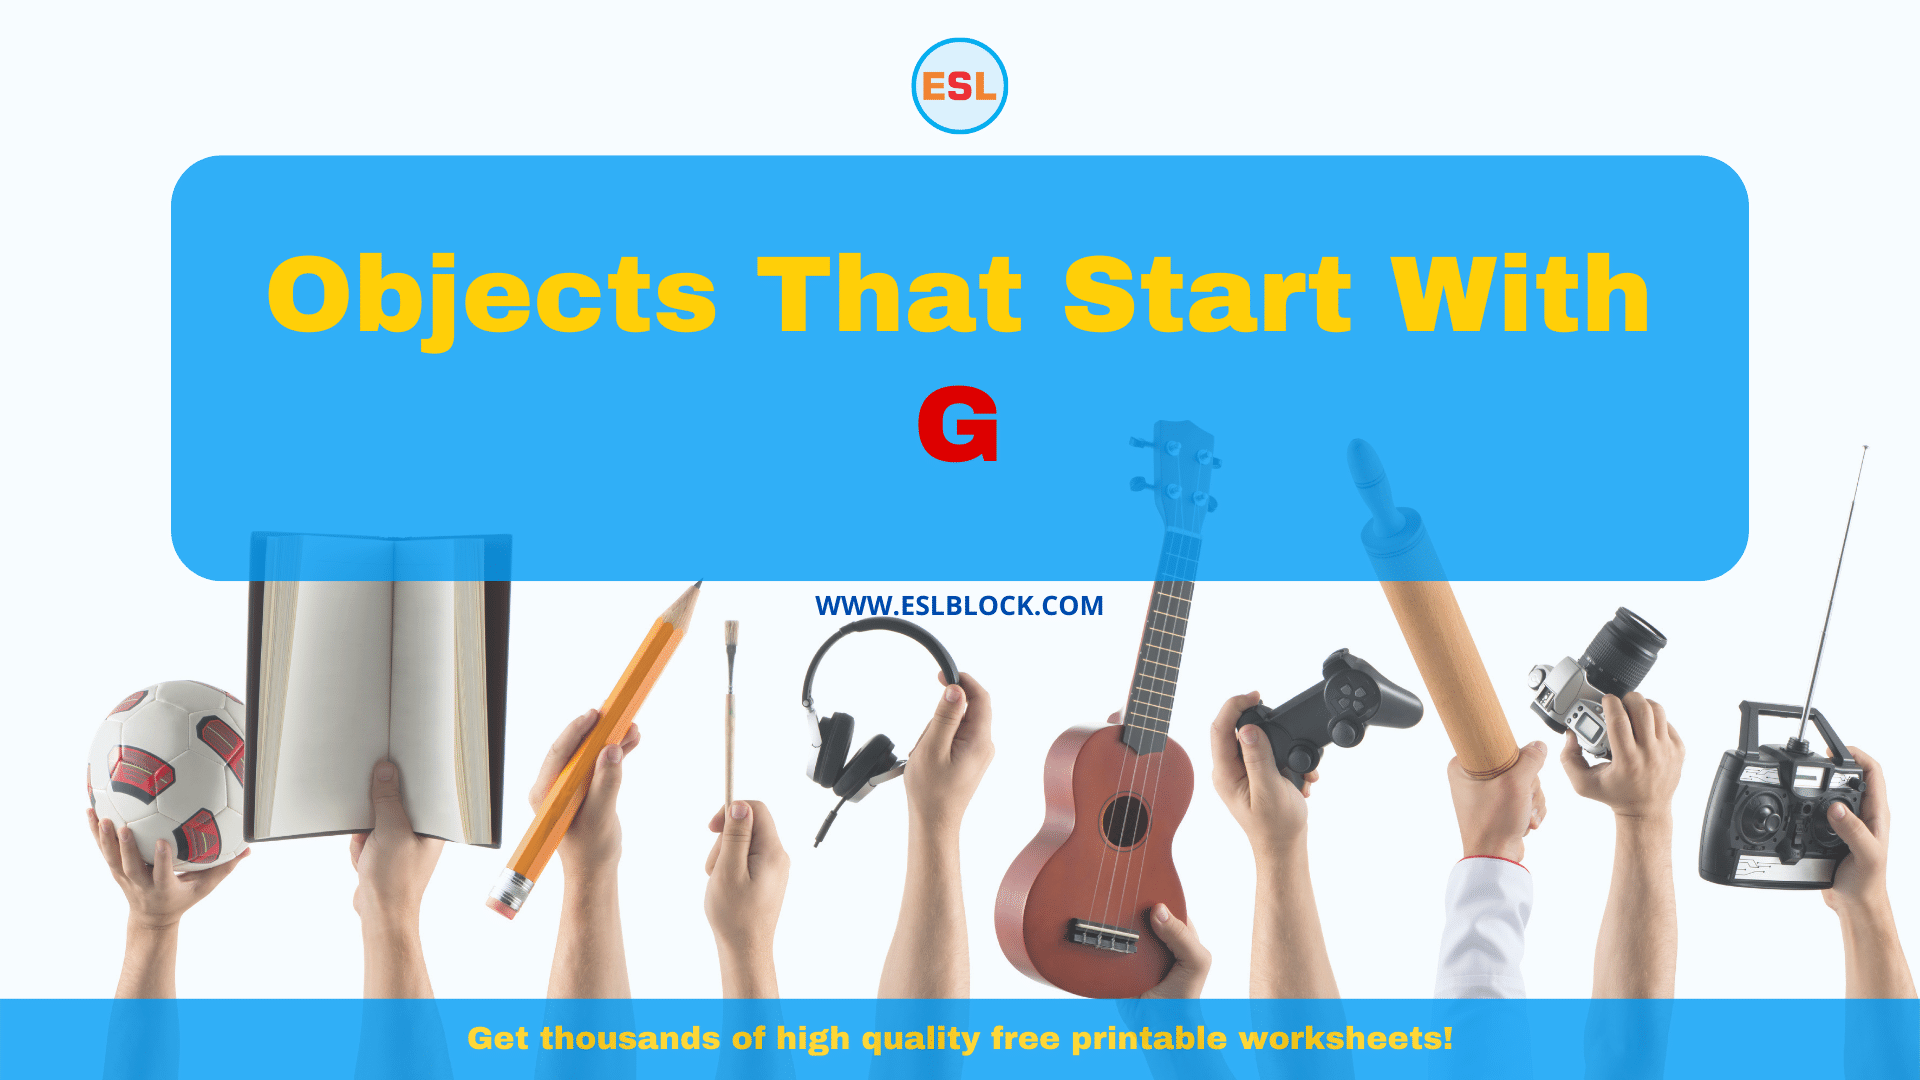 5 Letter Objects Starting With G, English, English Nouns, English Vocabulary, English Words, G Objects, G Objects in English, G Objects Names, List of Objects That Start With G, Nouns, Objects List, Objects That Start With G, Things Names, Vocabulary